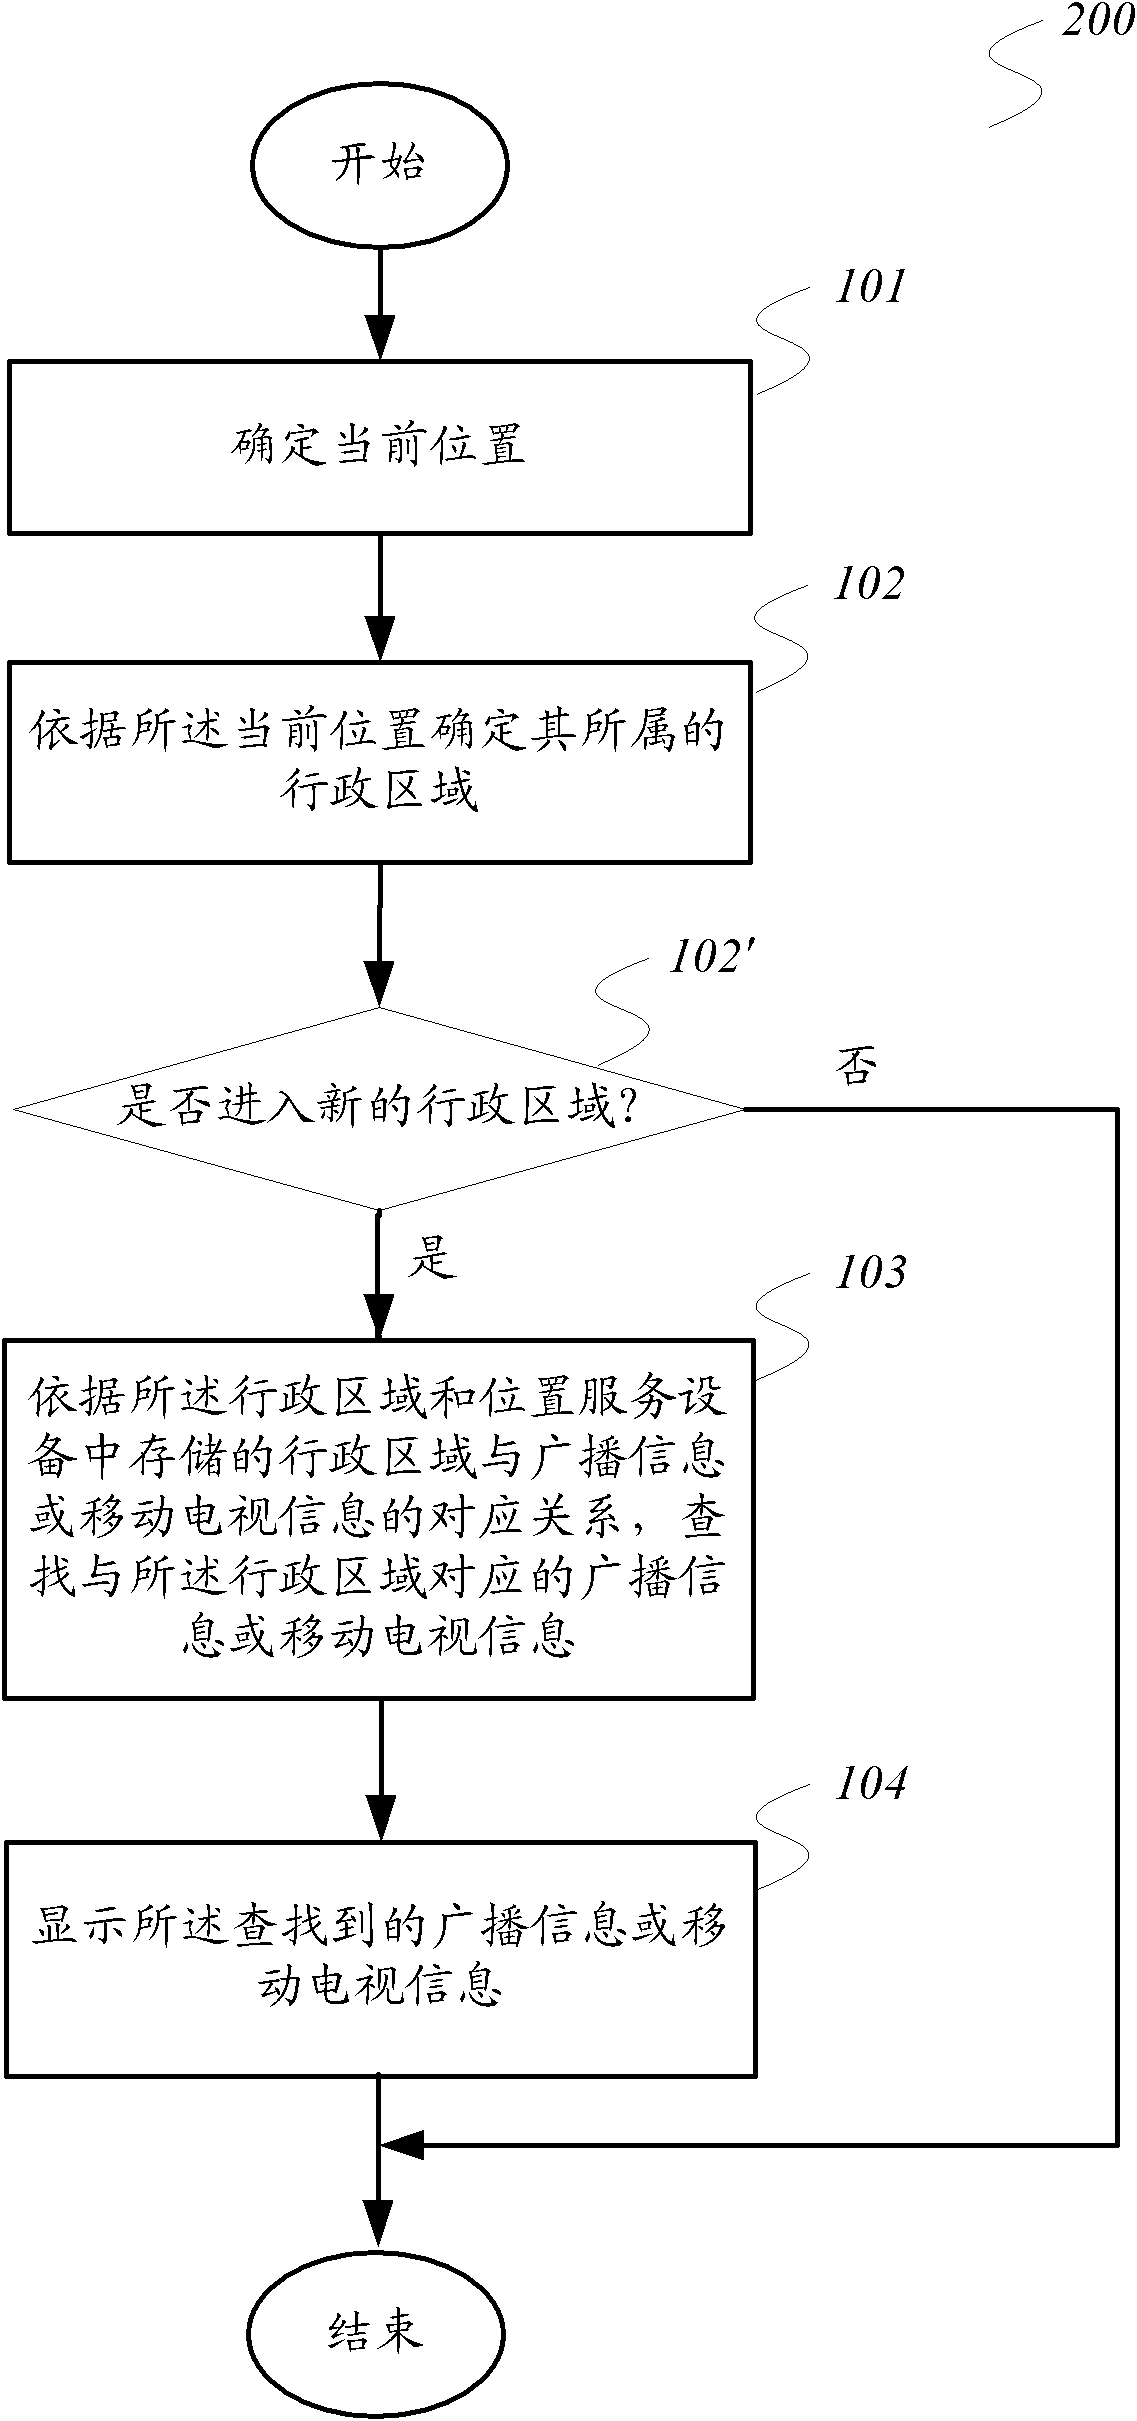 Method for displaying and regulating broadcast information or mobile television information as well as position service equipment